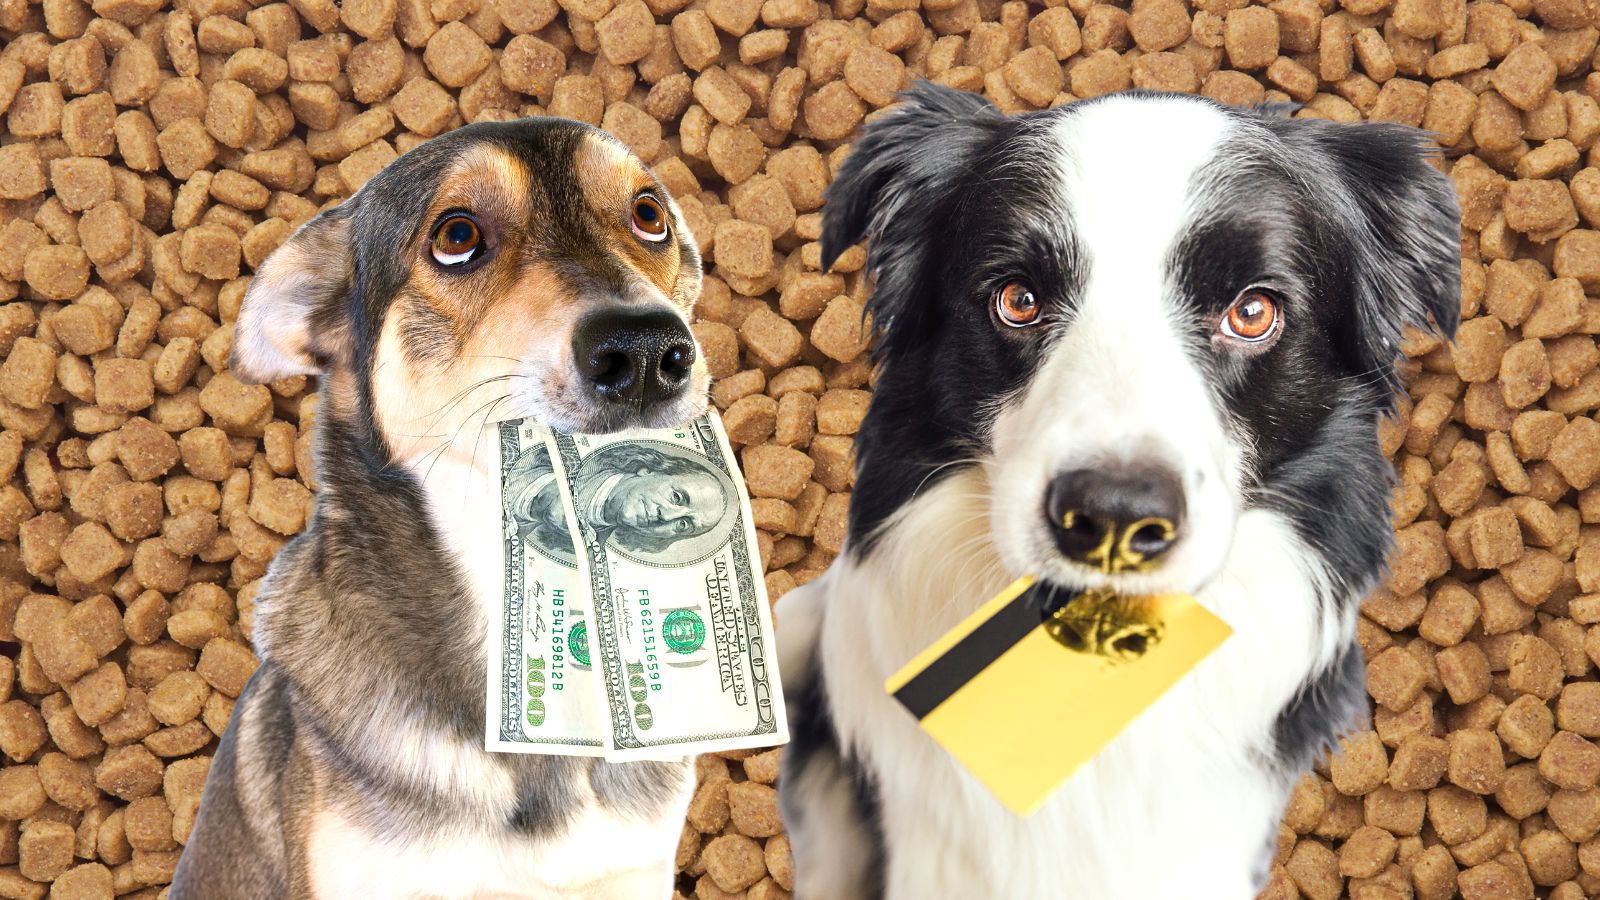 A border collie holding a credit card and a dog holding cash on a backdrop of pet kibble